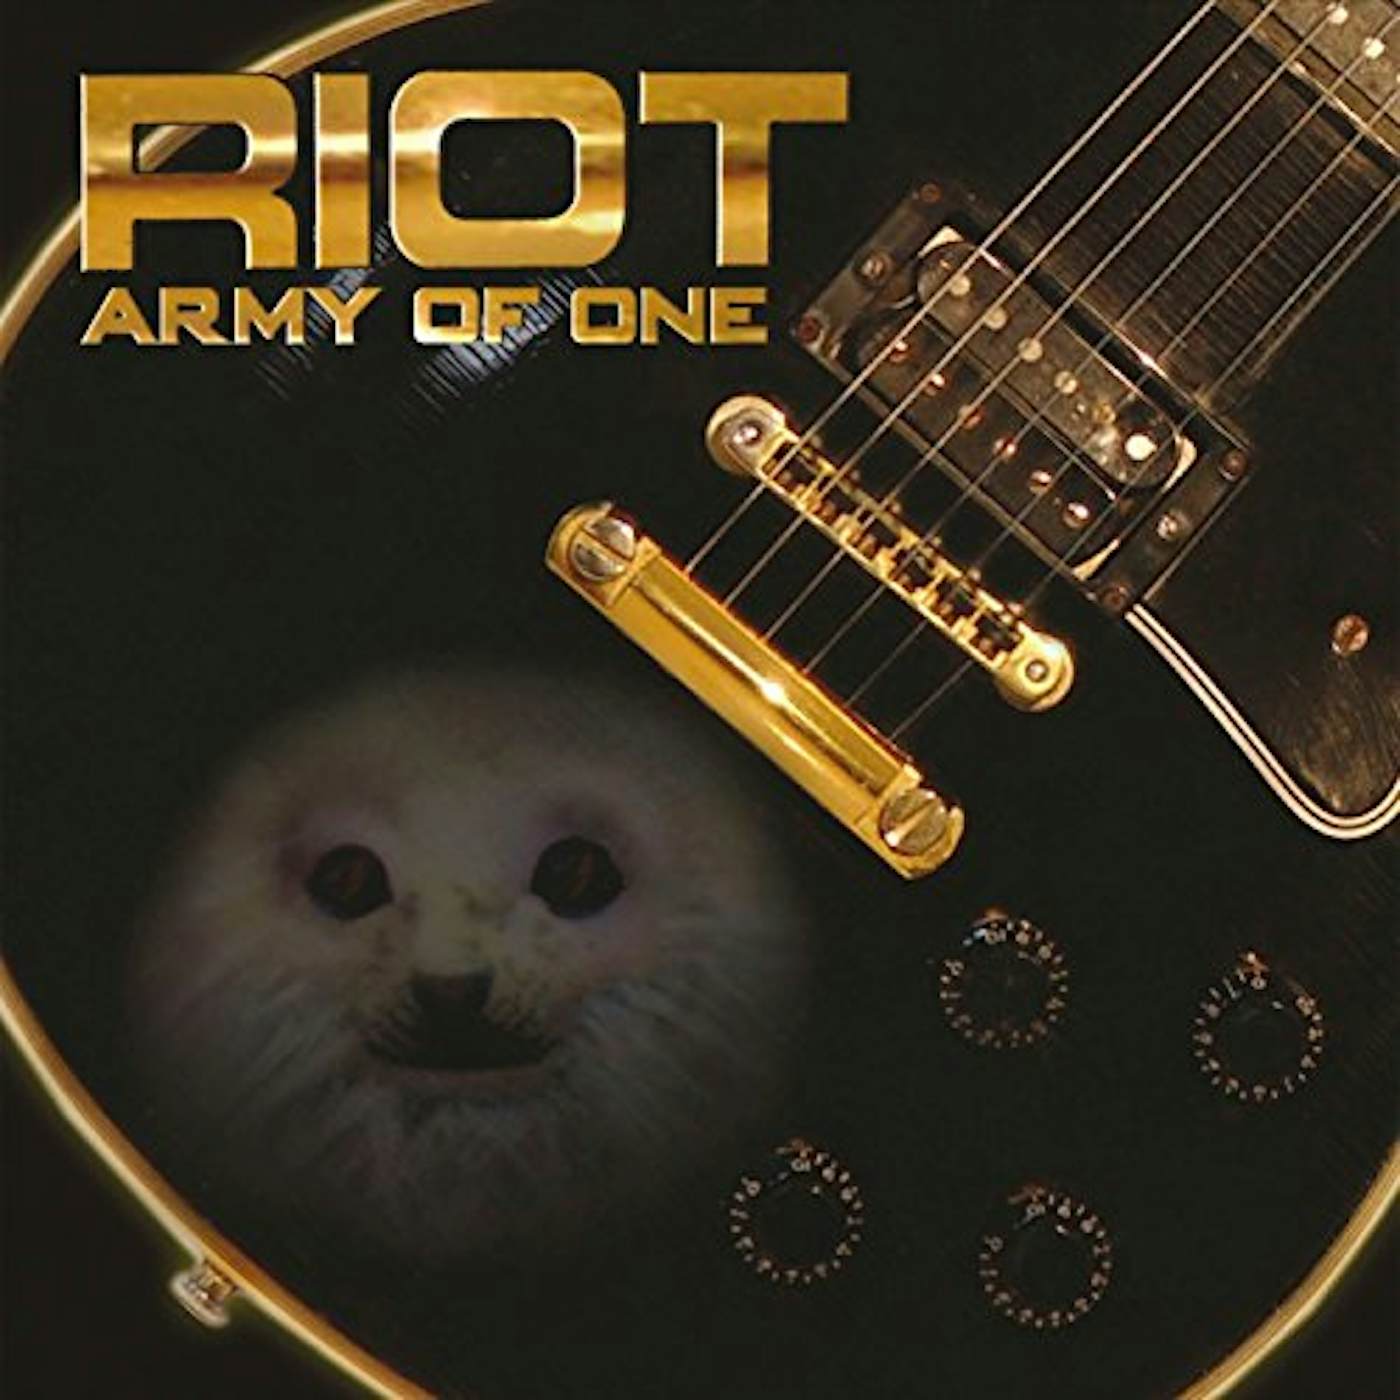 Riot Army of One Vinyl Record